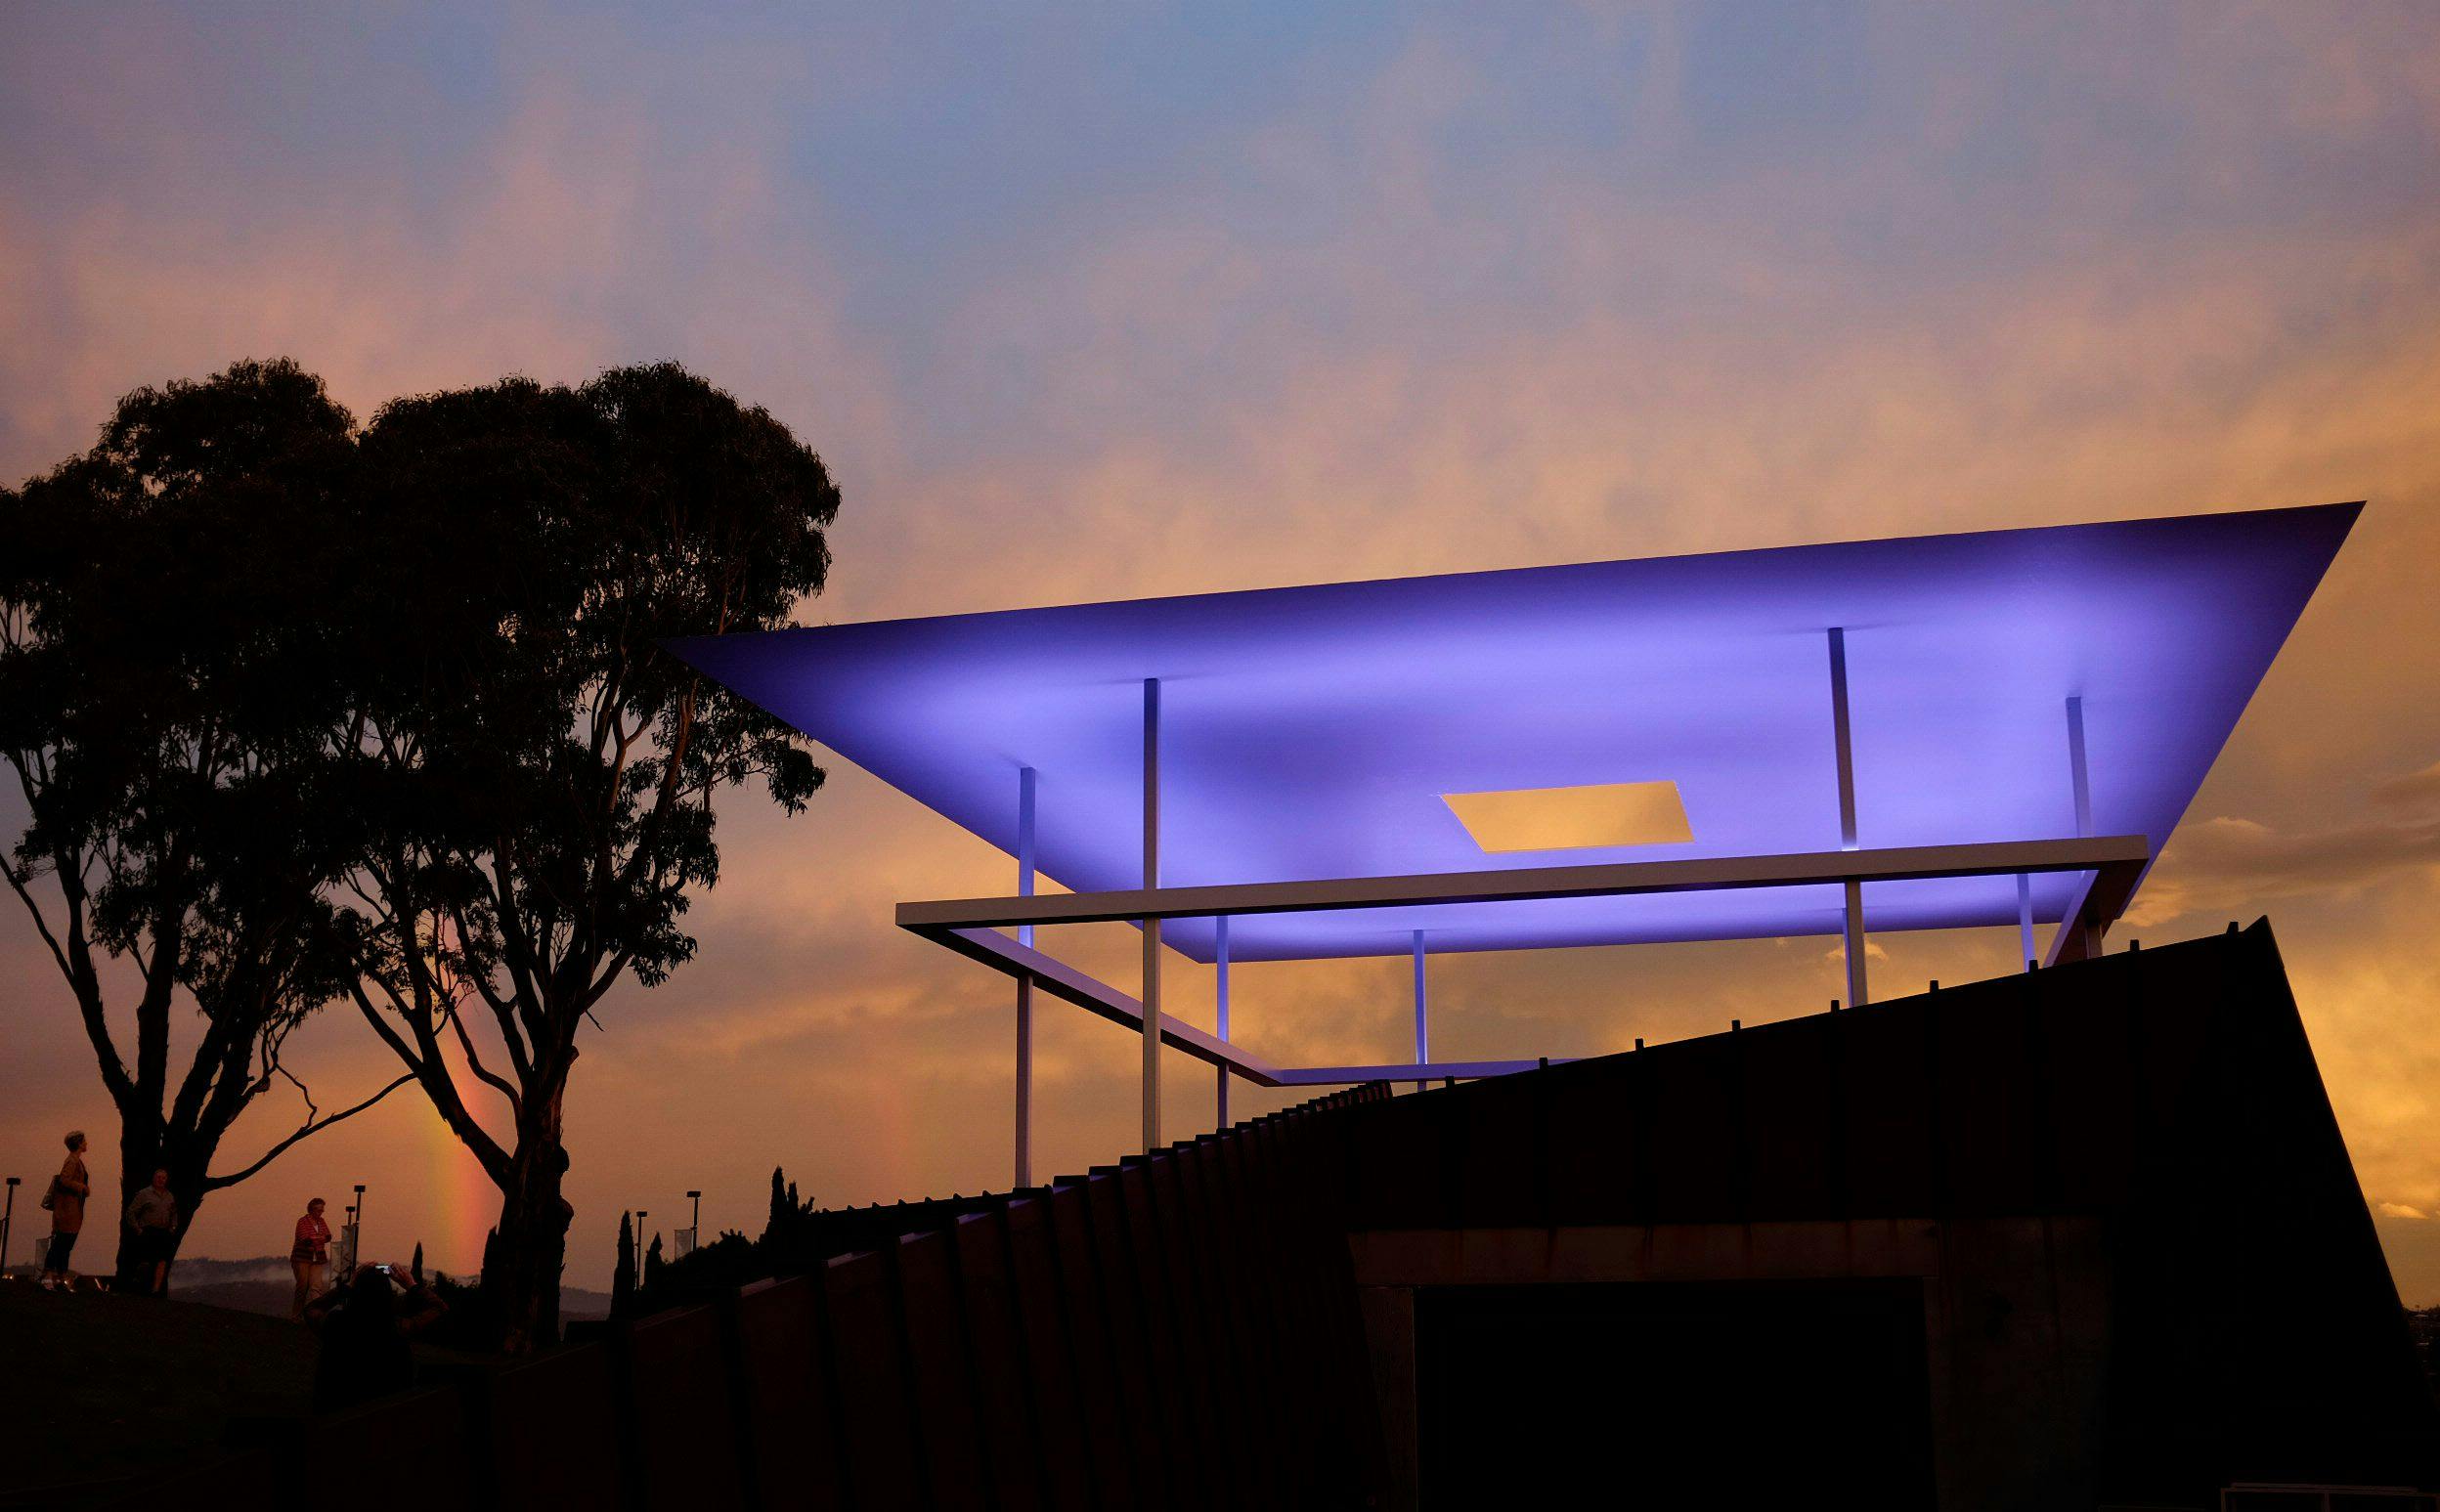 A large outdoor light installation, projecting blue/purple hues at night